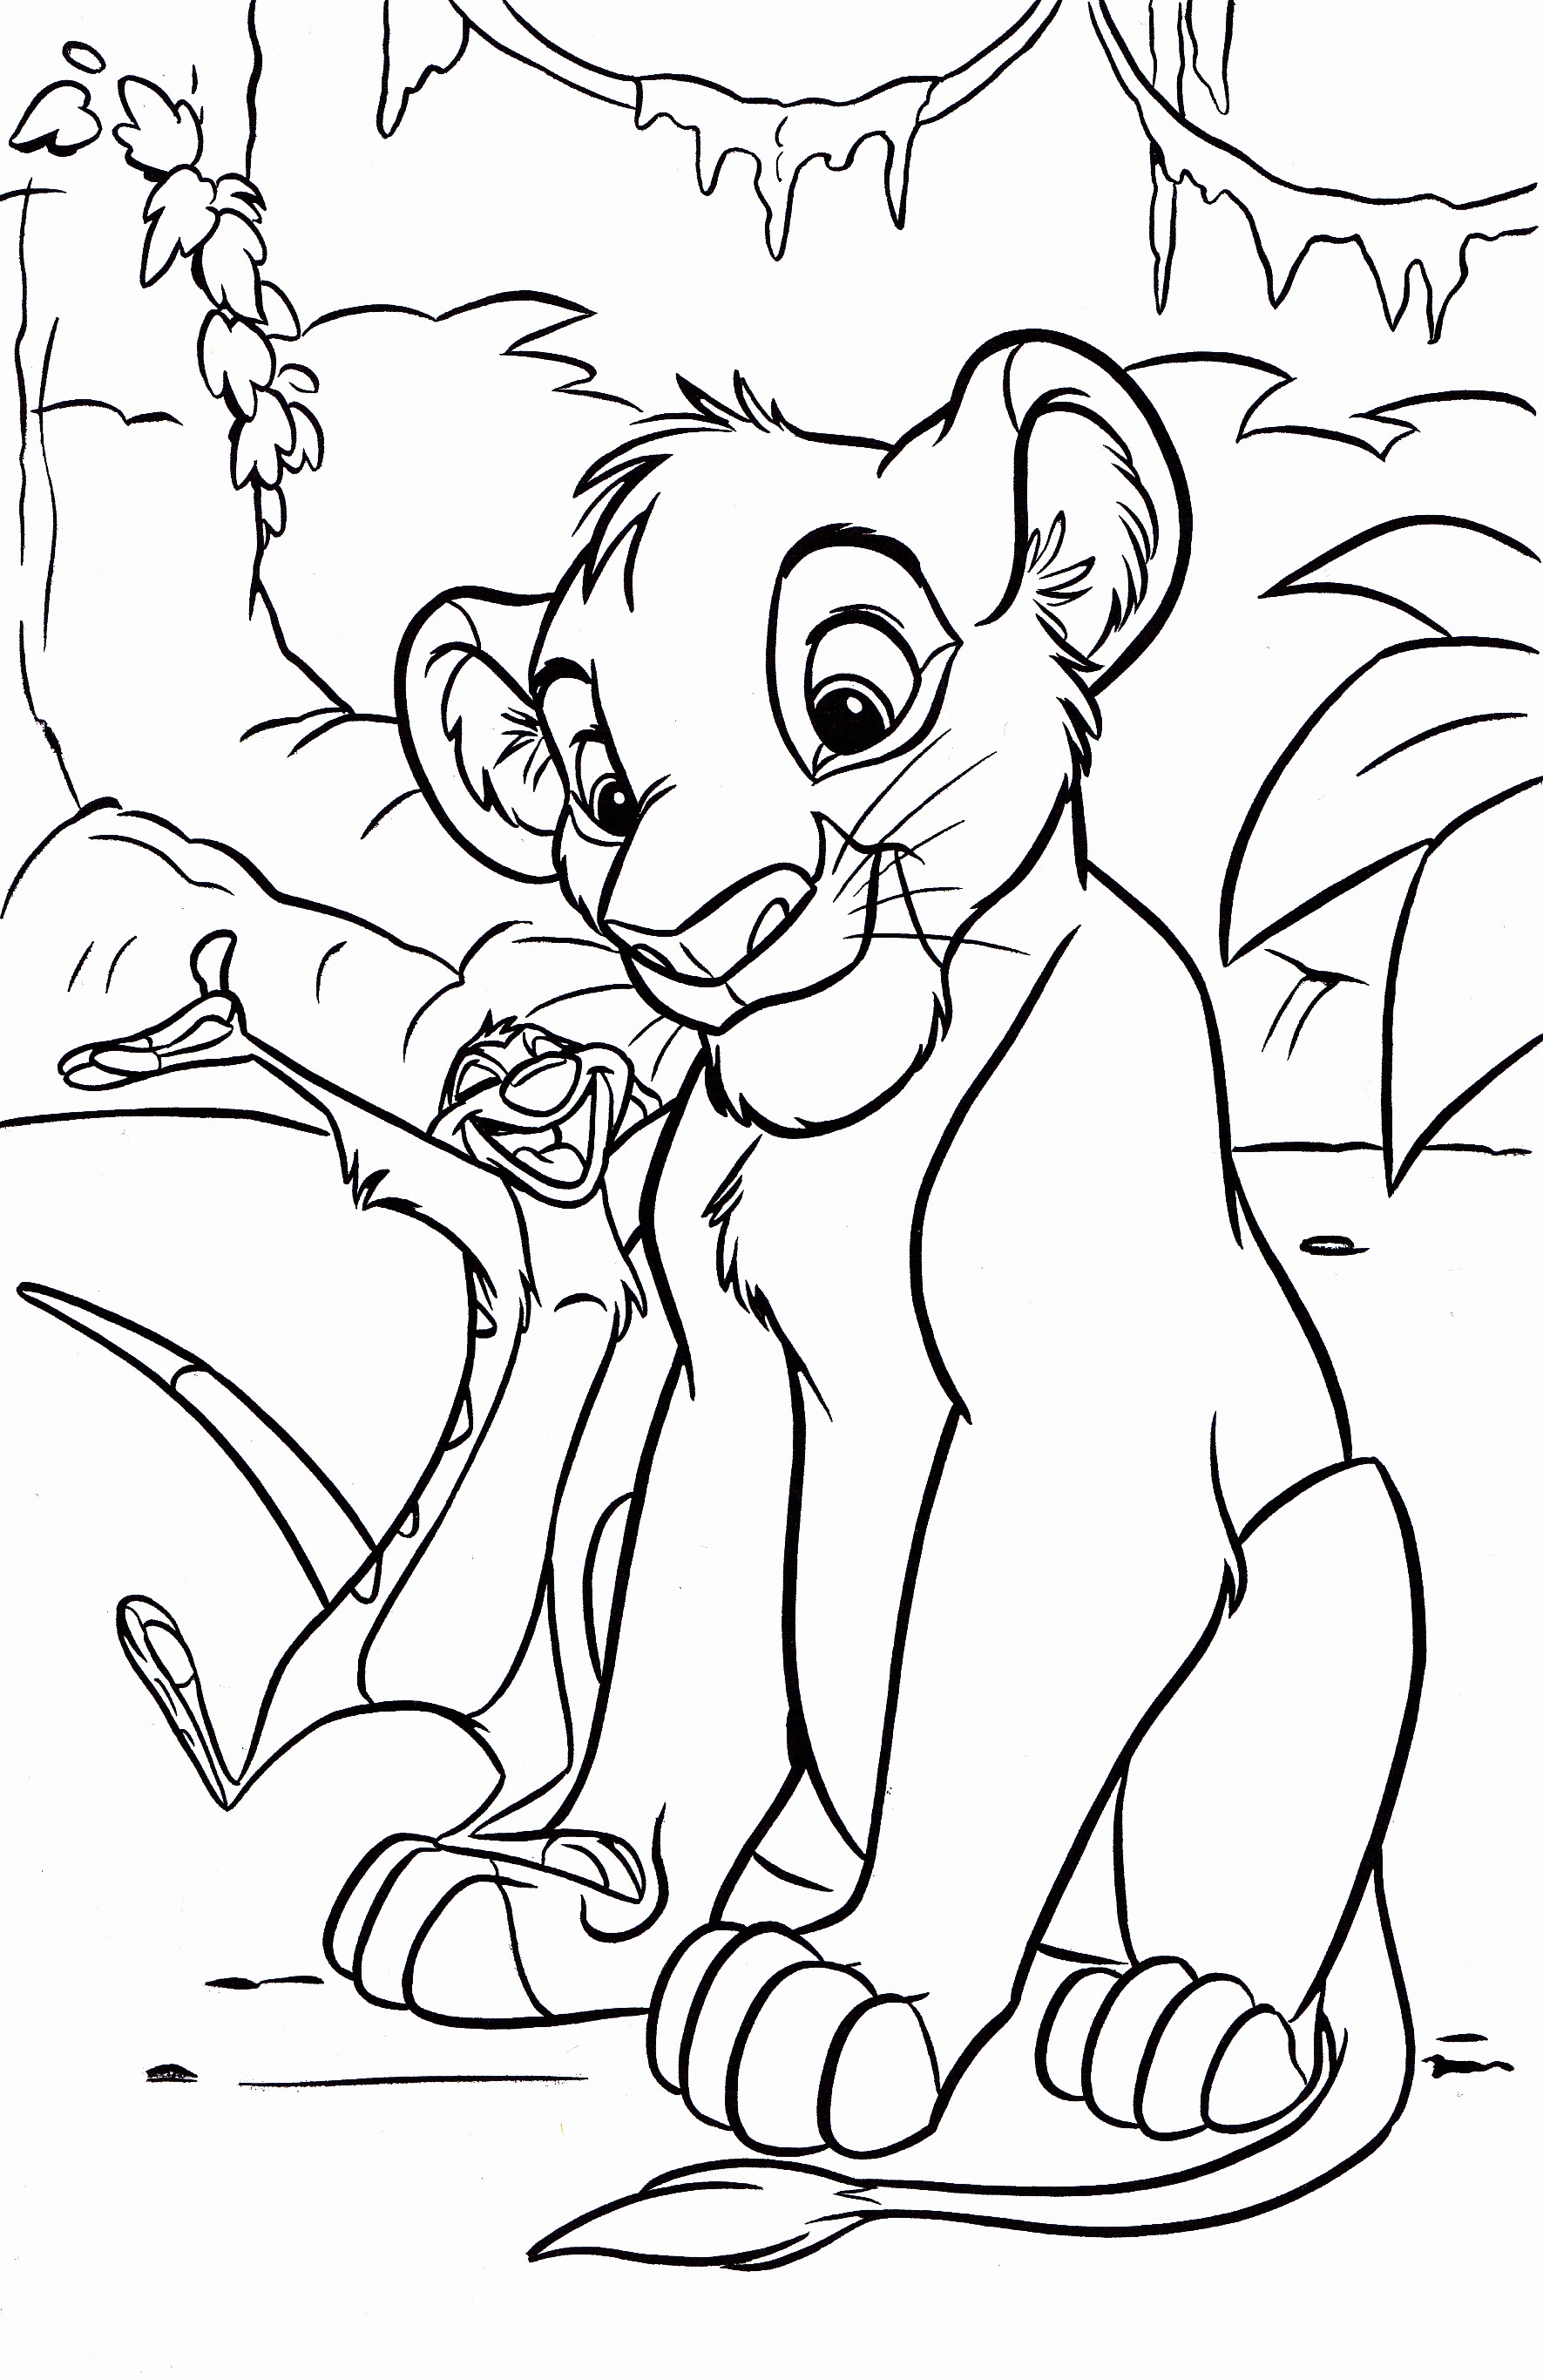 Coloring Pages Of Disney Characters
 Free Printable Simba Coloring Pages For Kids